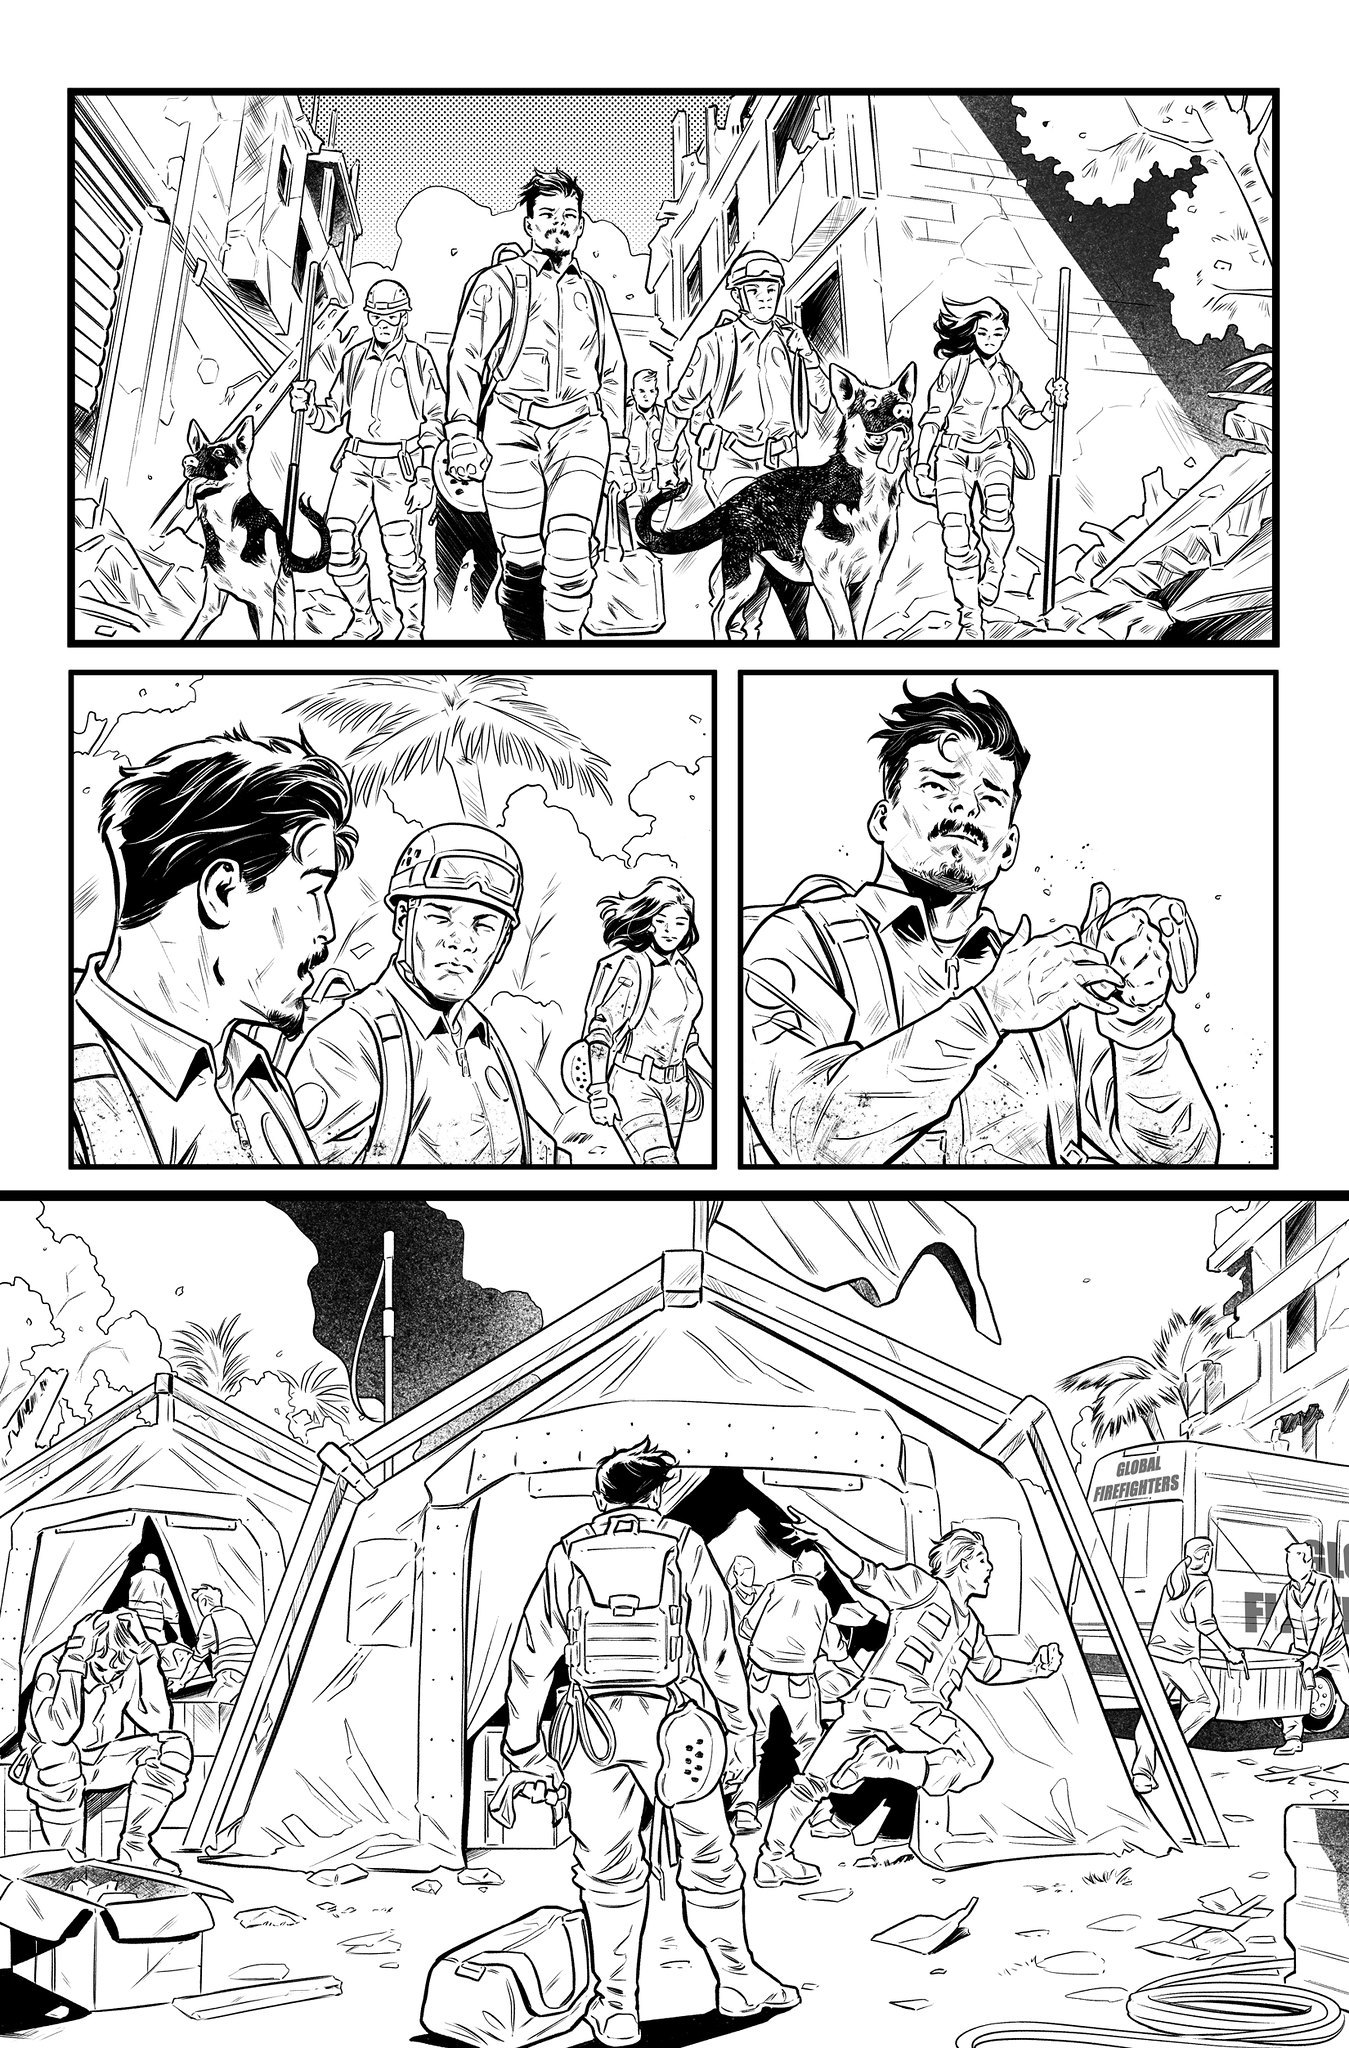 SURVIVAL#1_PAGE5_INKS